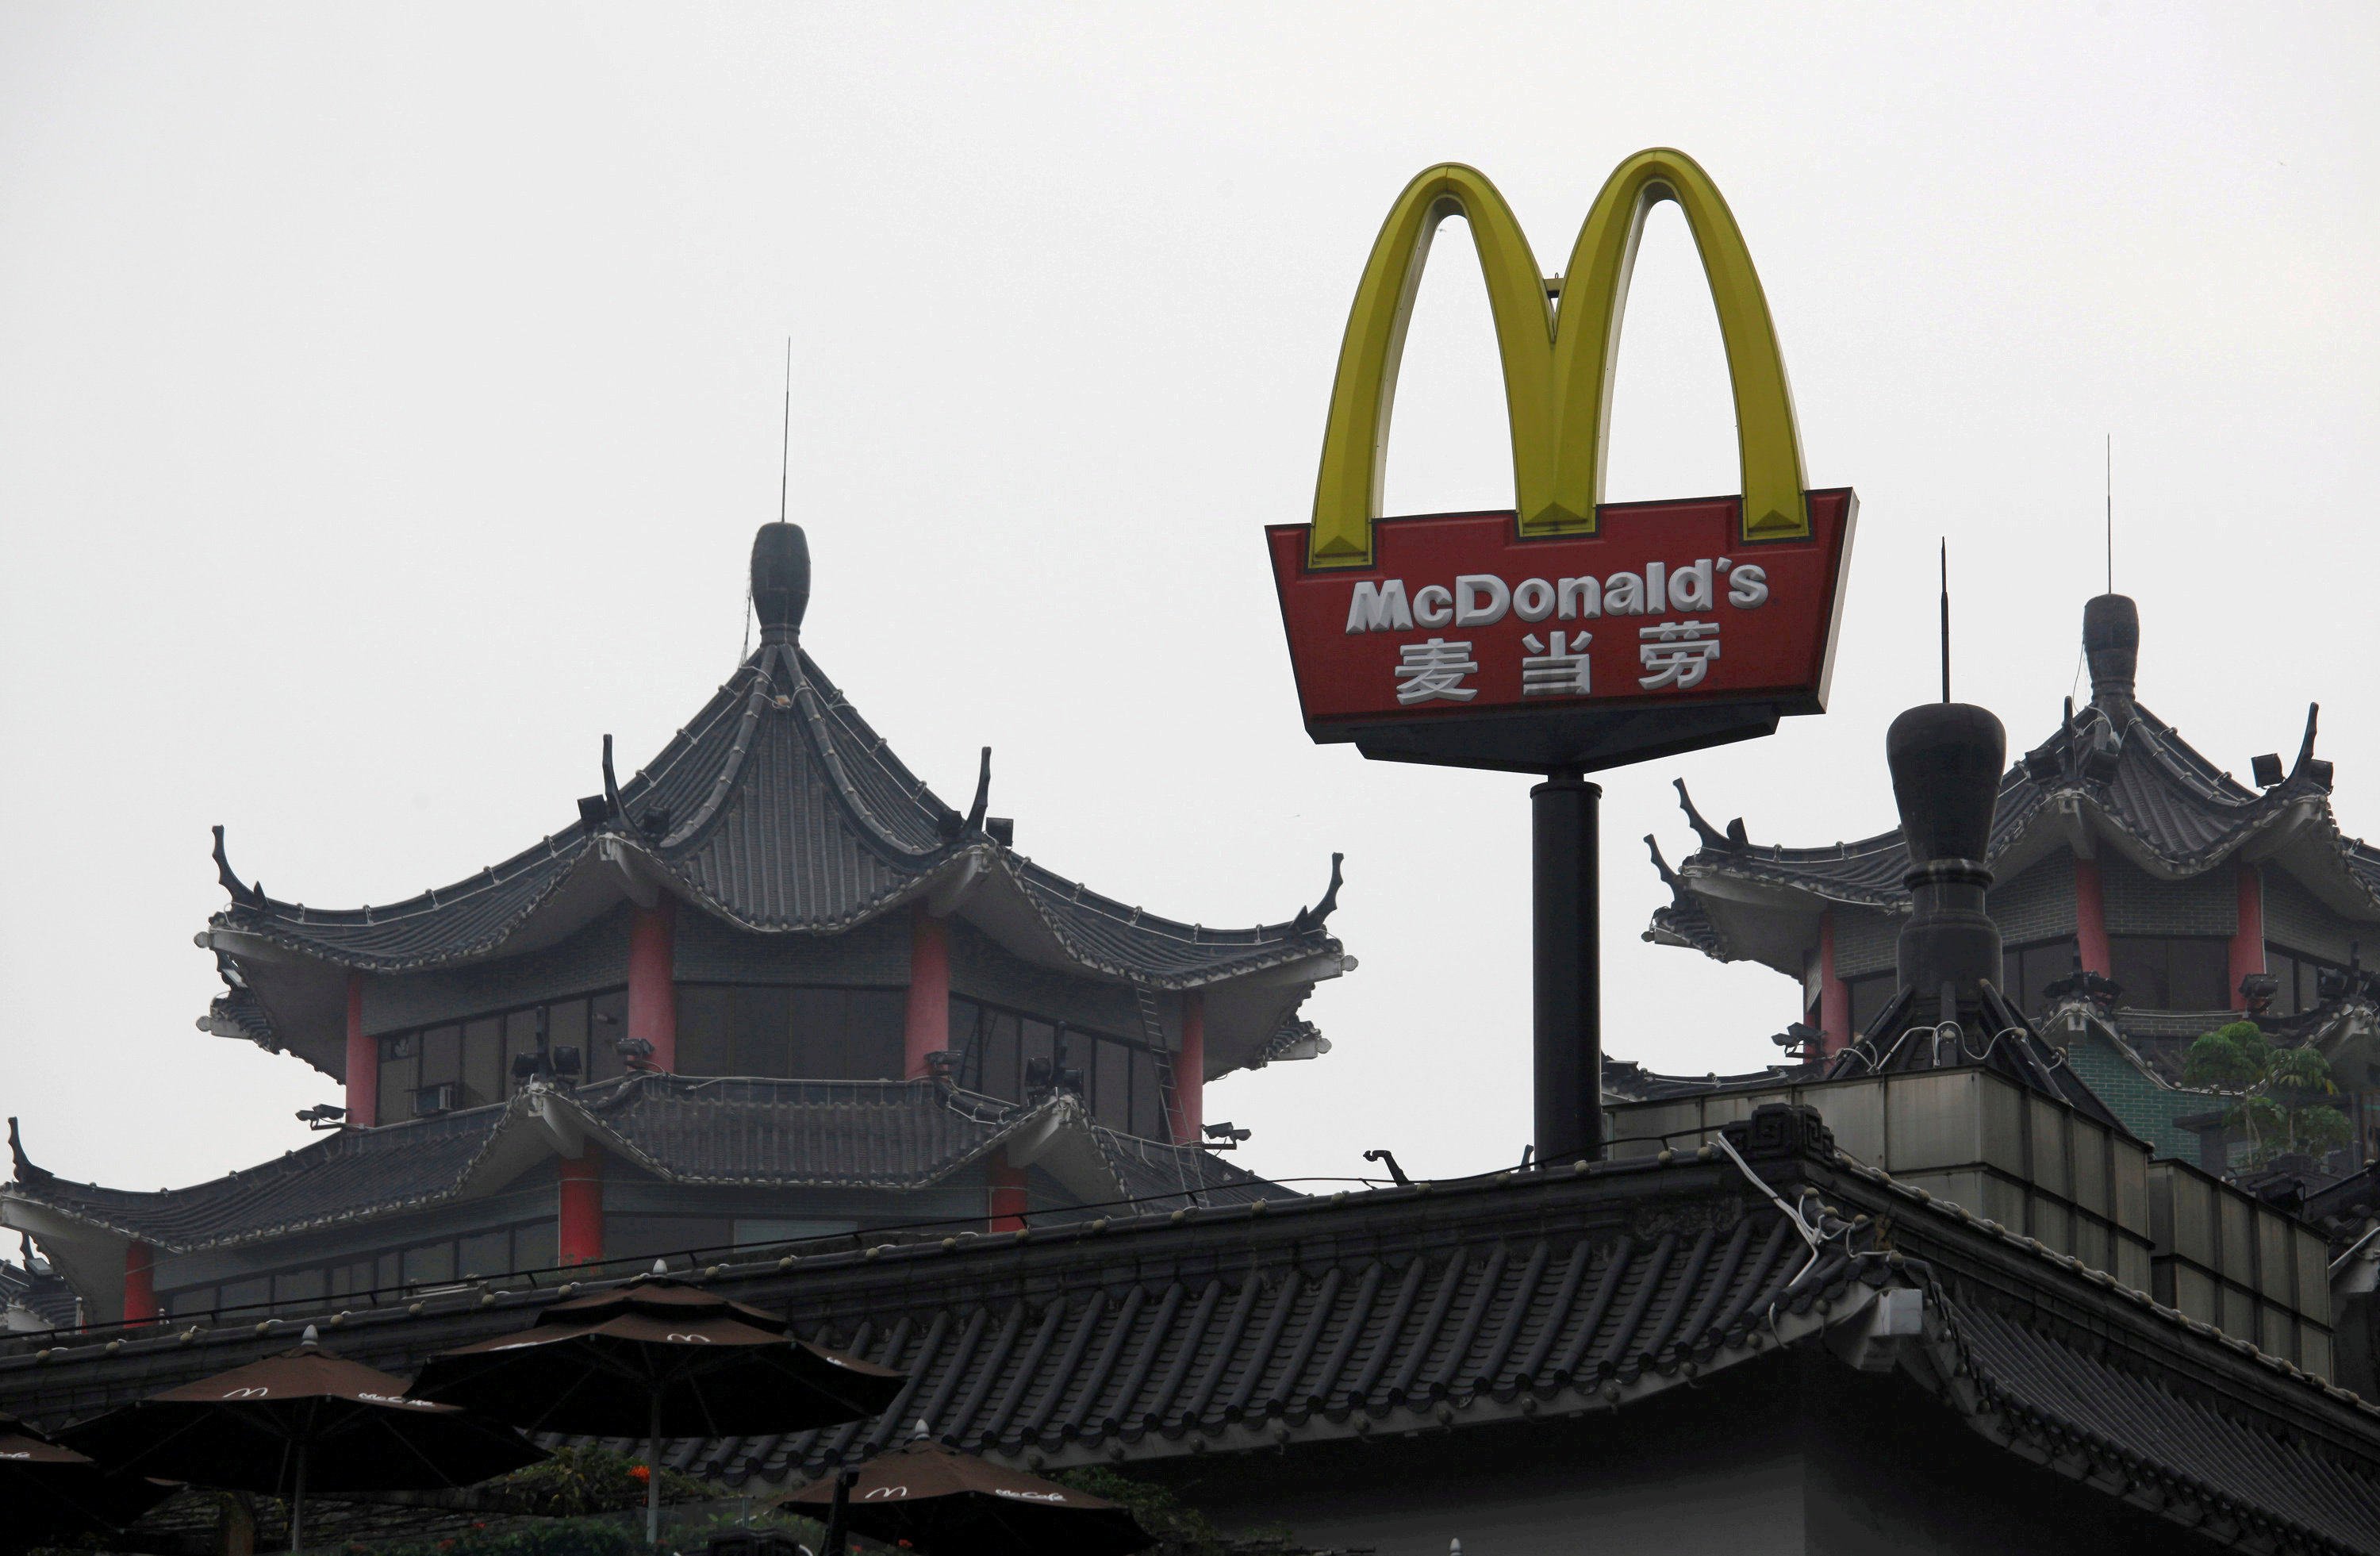 McDonald’s chief executive Chris Kempczinski said there was ‘no better time’ for the deal, which will allow the fast food chain to tap the long-term potential of China. Photo: Reuters